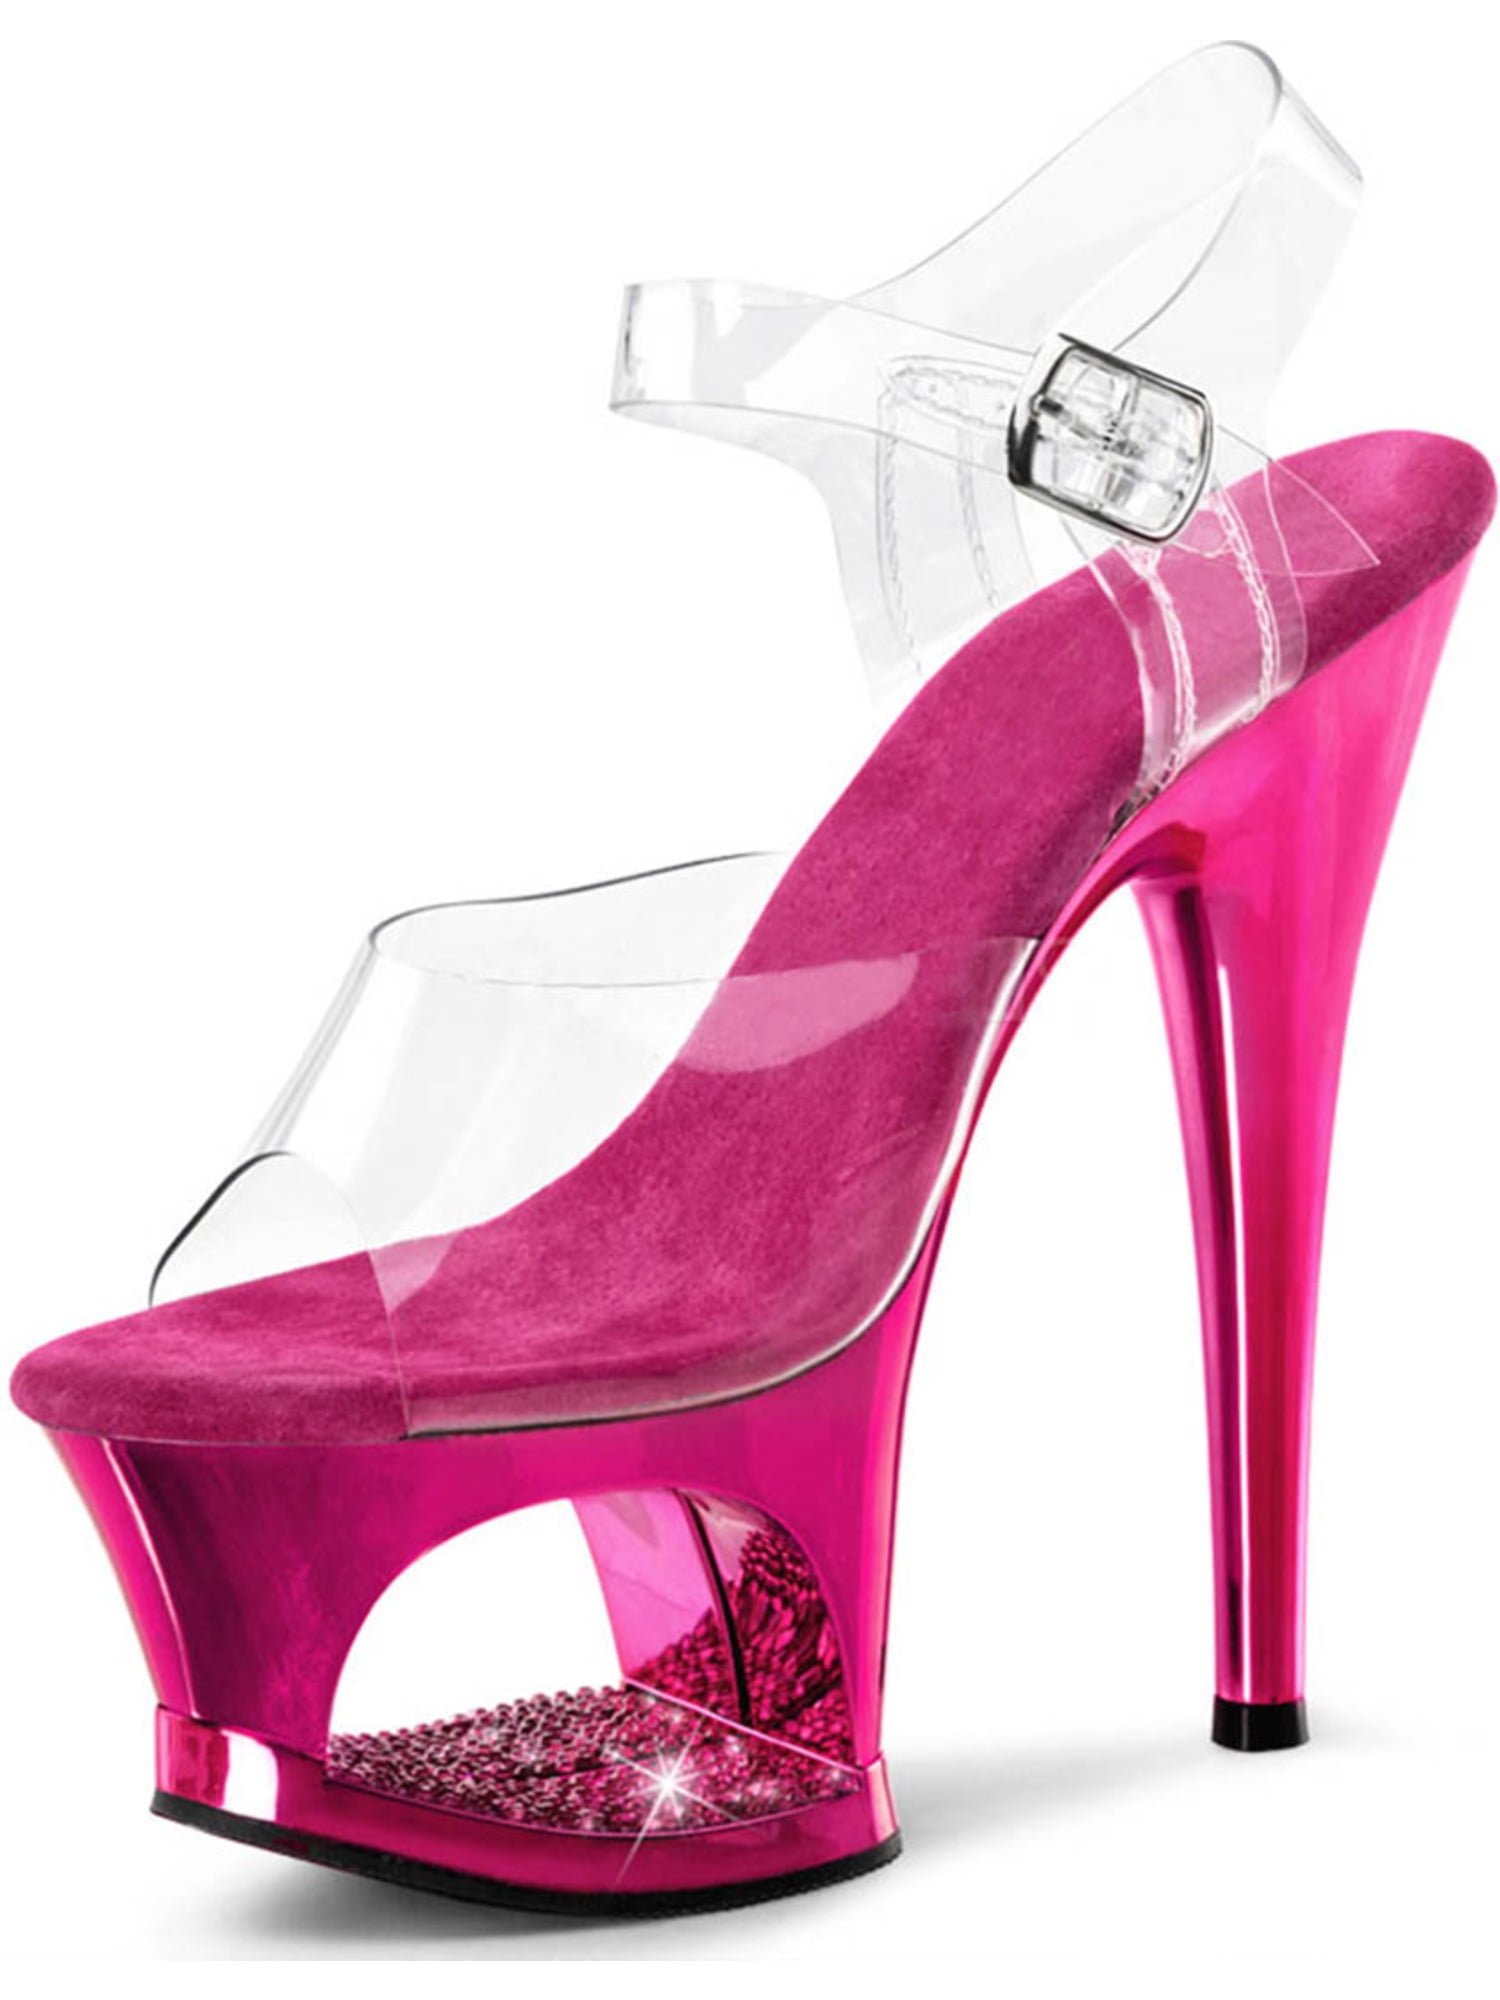 Pleaser - Shiny Hot Pink Heels with Rhinestone Encrusted Cutout ...